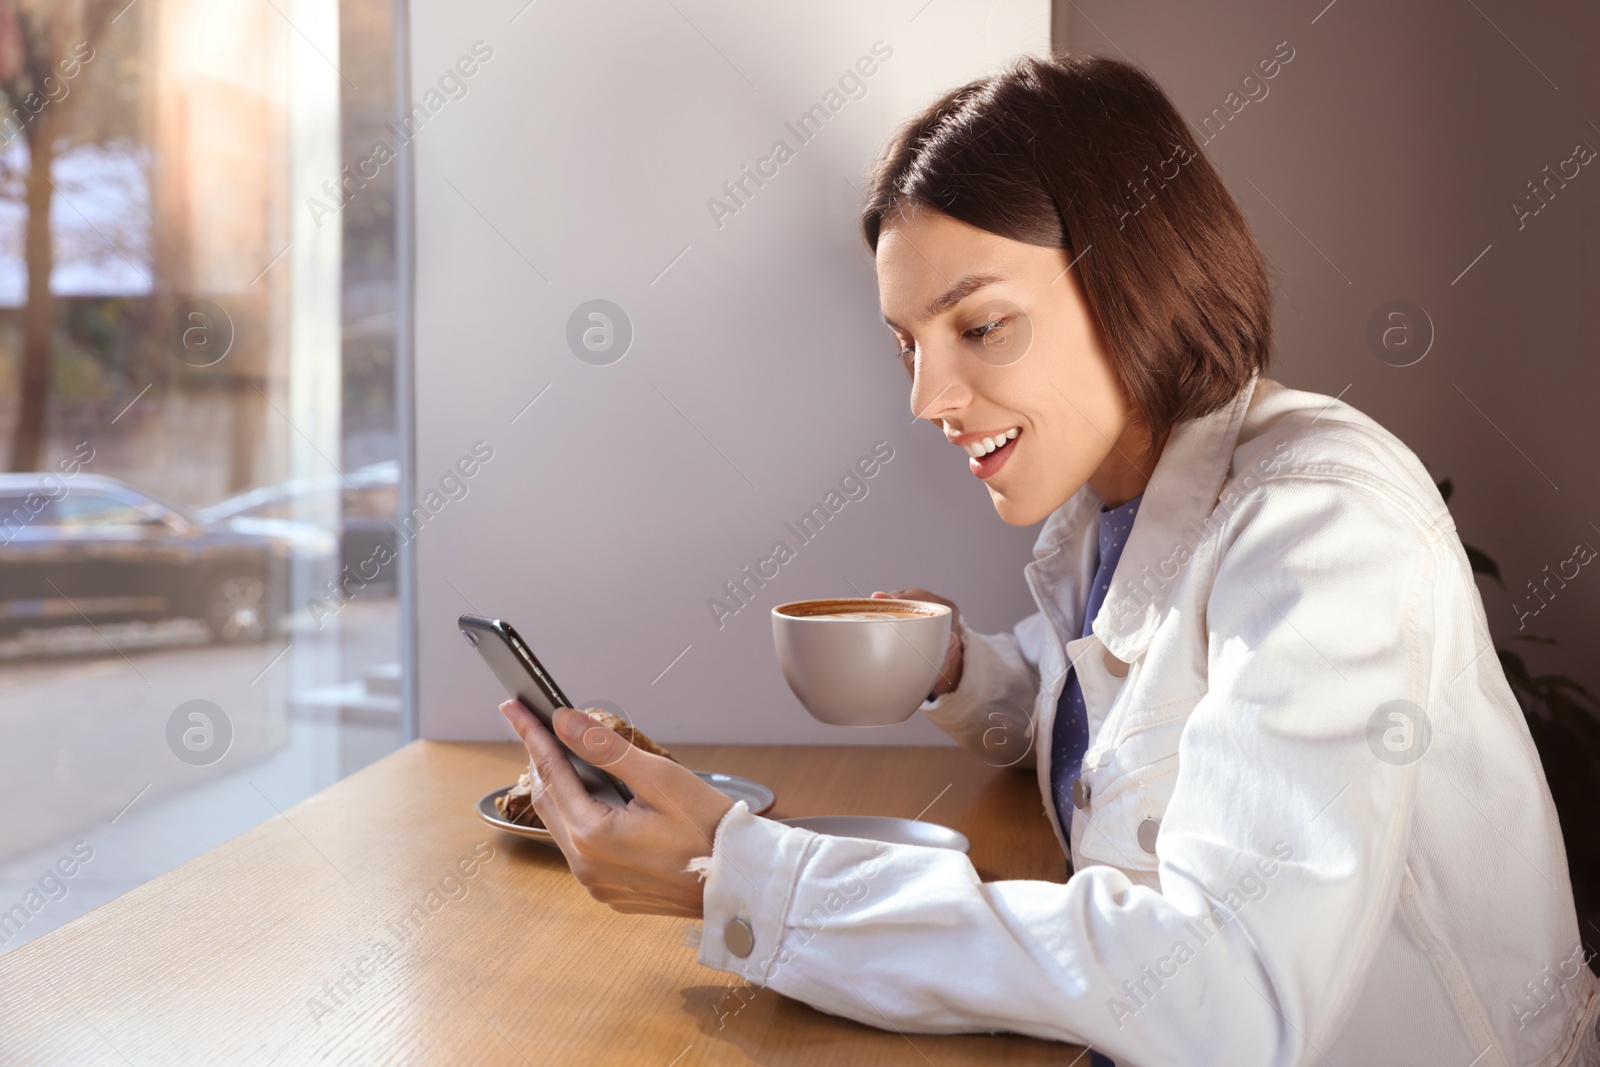 Photo of Special Promotion. Emotional young woman with cup of drink using smartphone at table in cafe